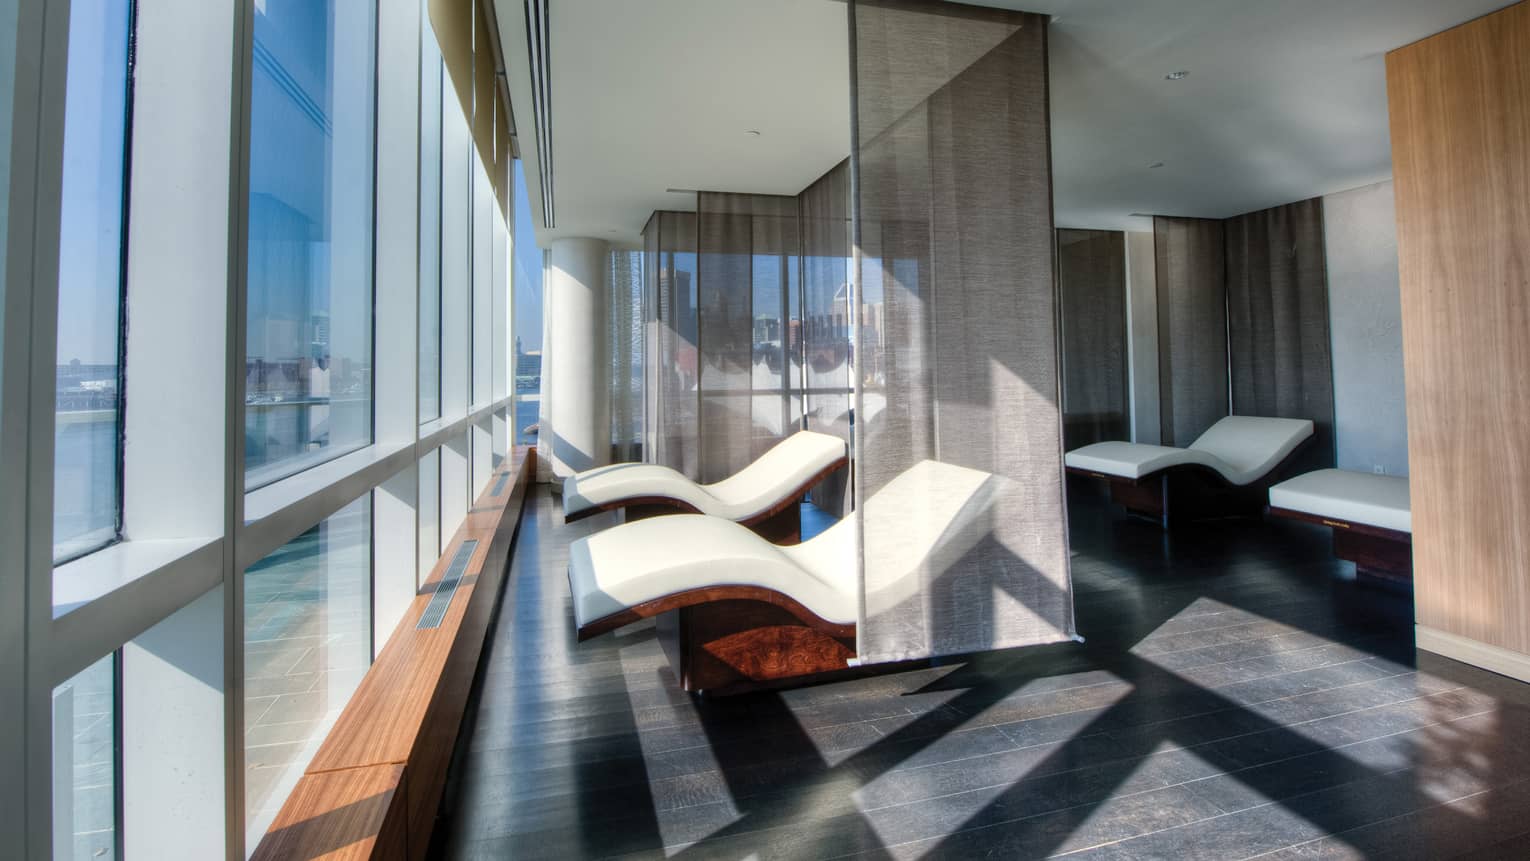 Two curved white spa chairs divided by sheer panel curtains in front of floor-to-ceiling windows